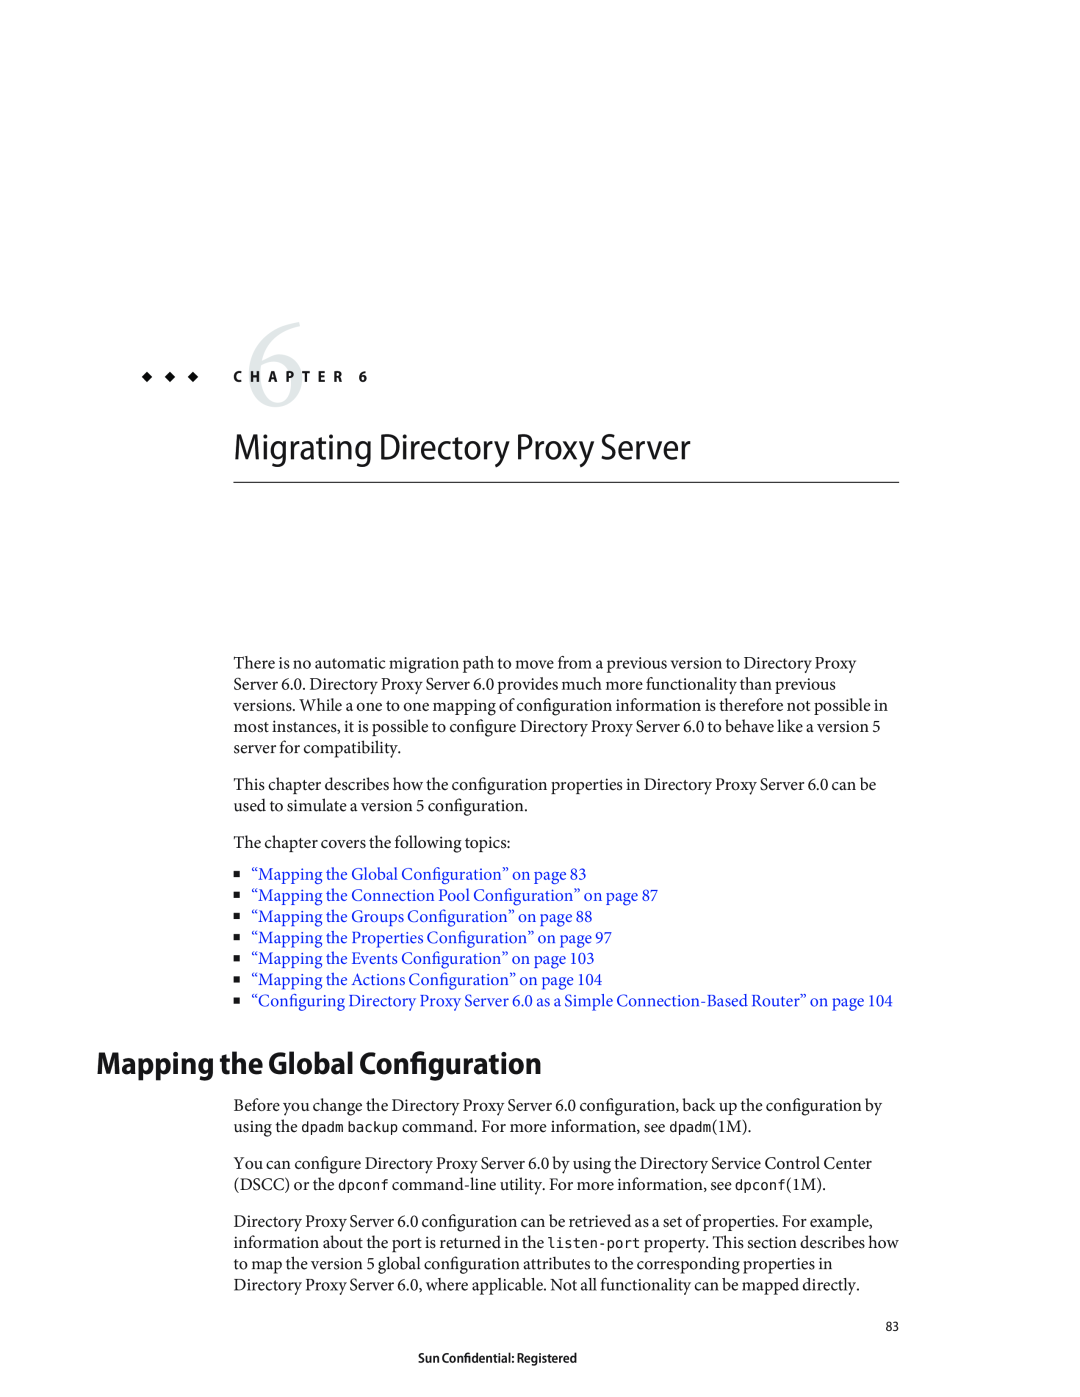 Sun Microsystems 8190994 manual Migrating Directory Proxy Server, Mapping the Global Configuration 